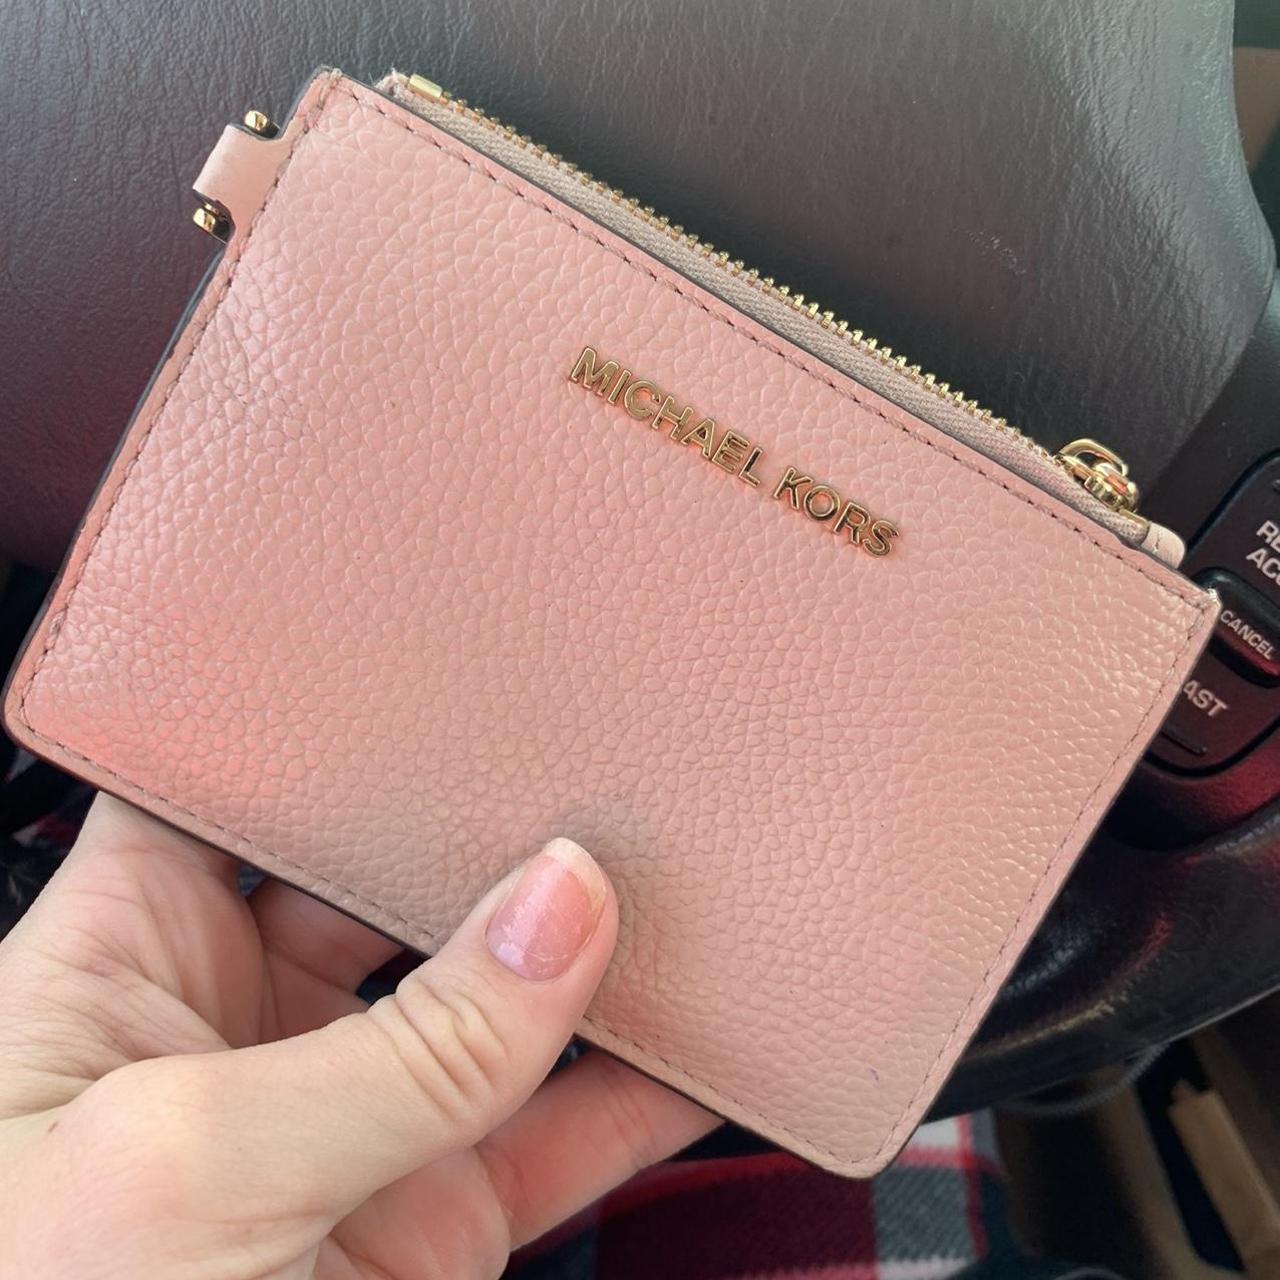 PINK MICHAEL KORS WALLET 💗💕 Great condition, used - Depop